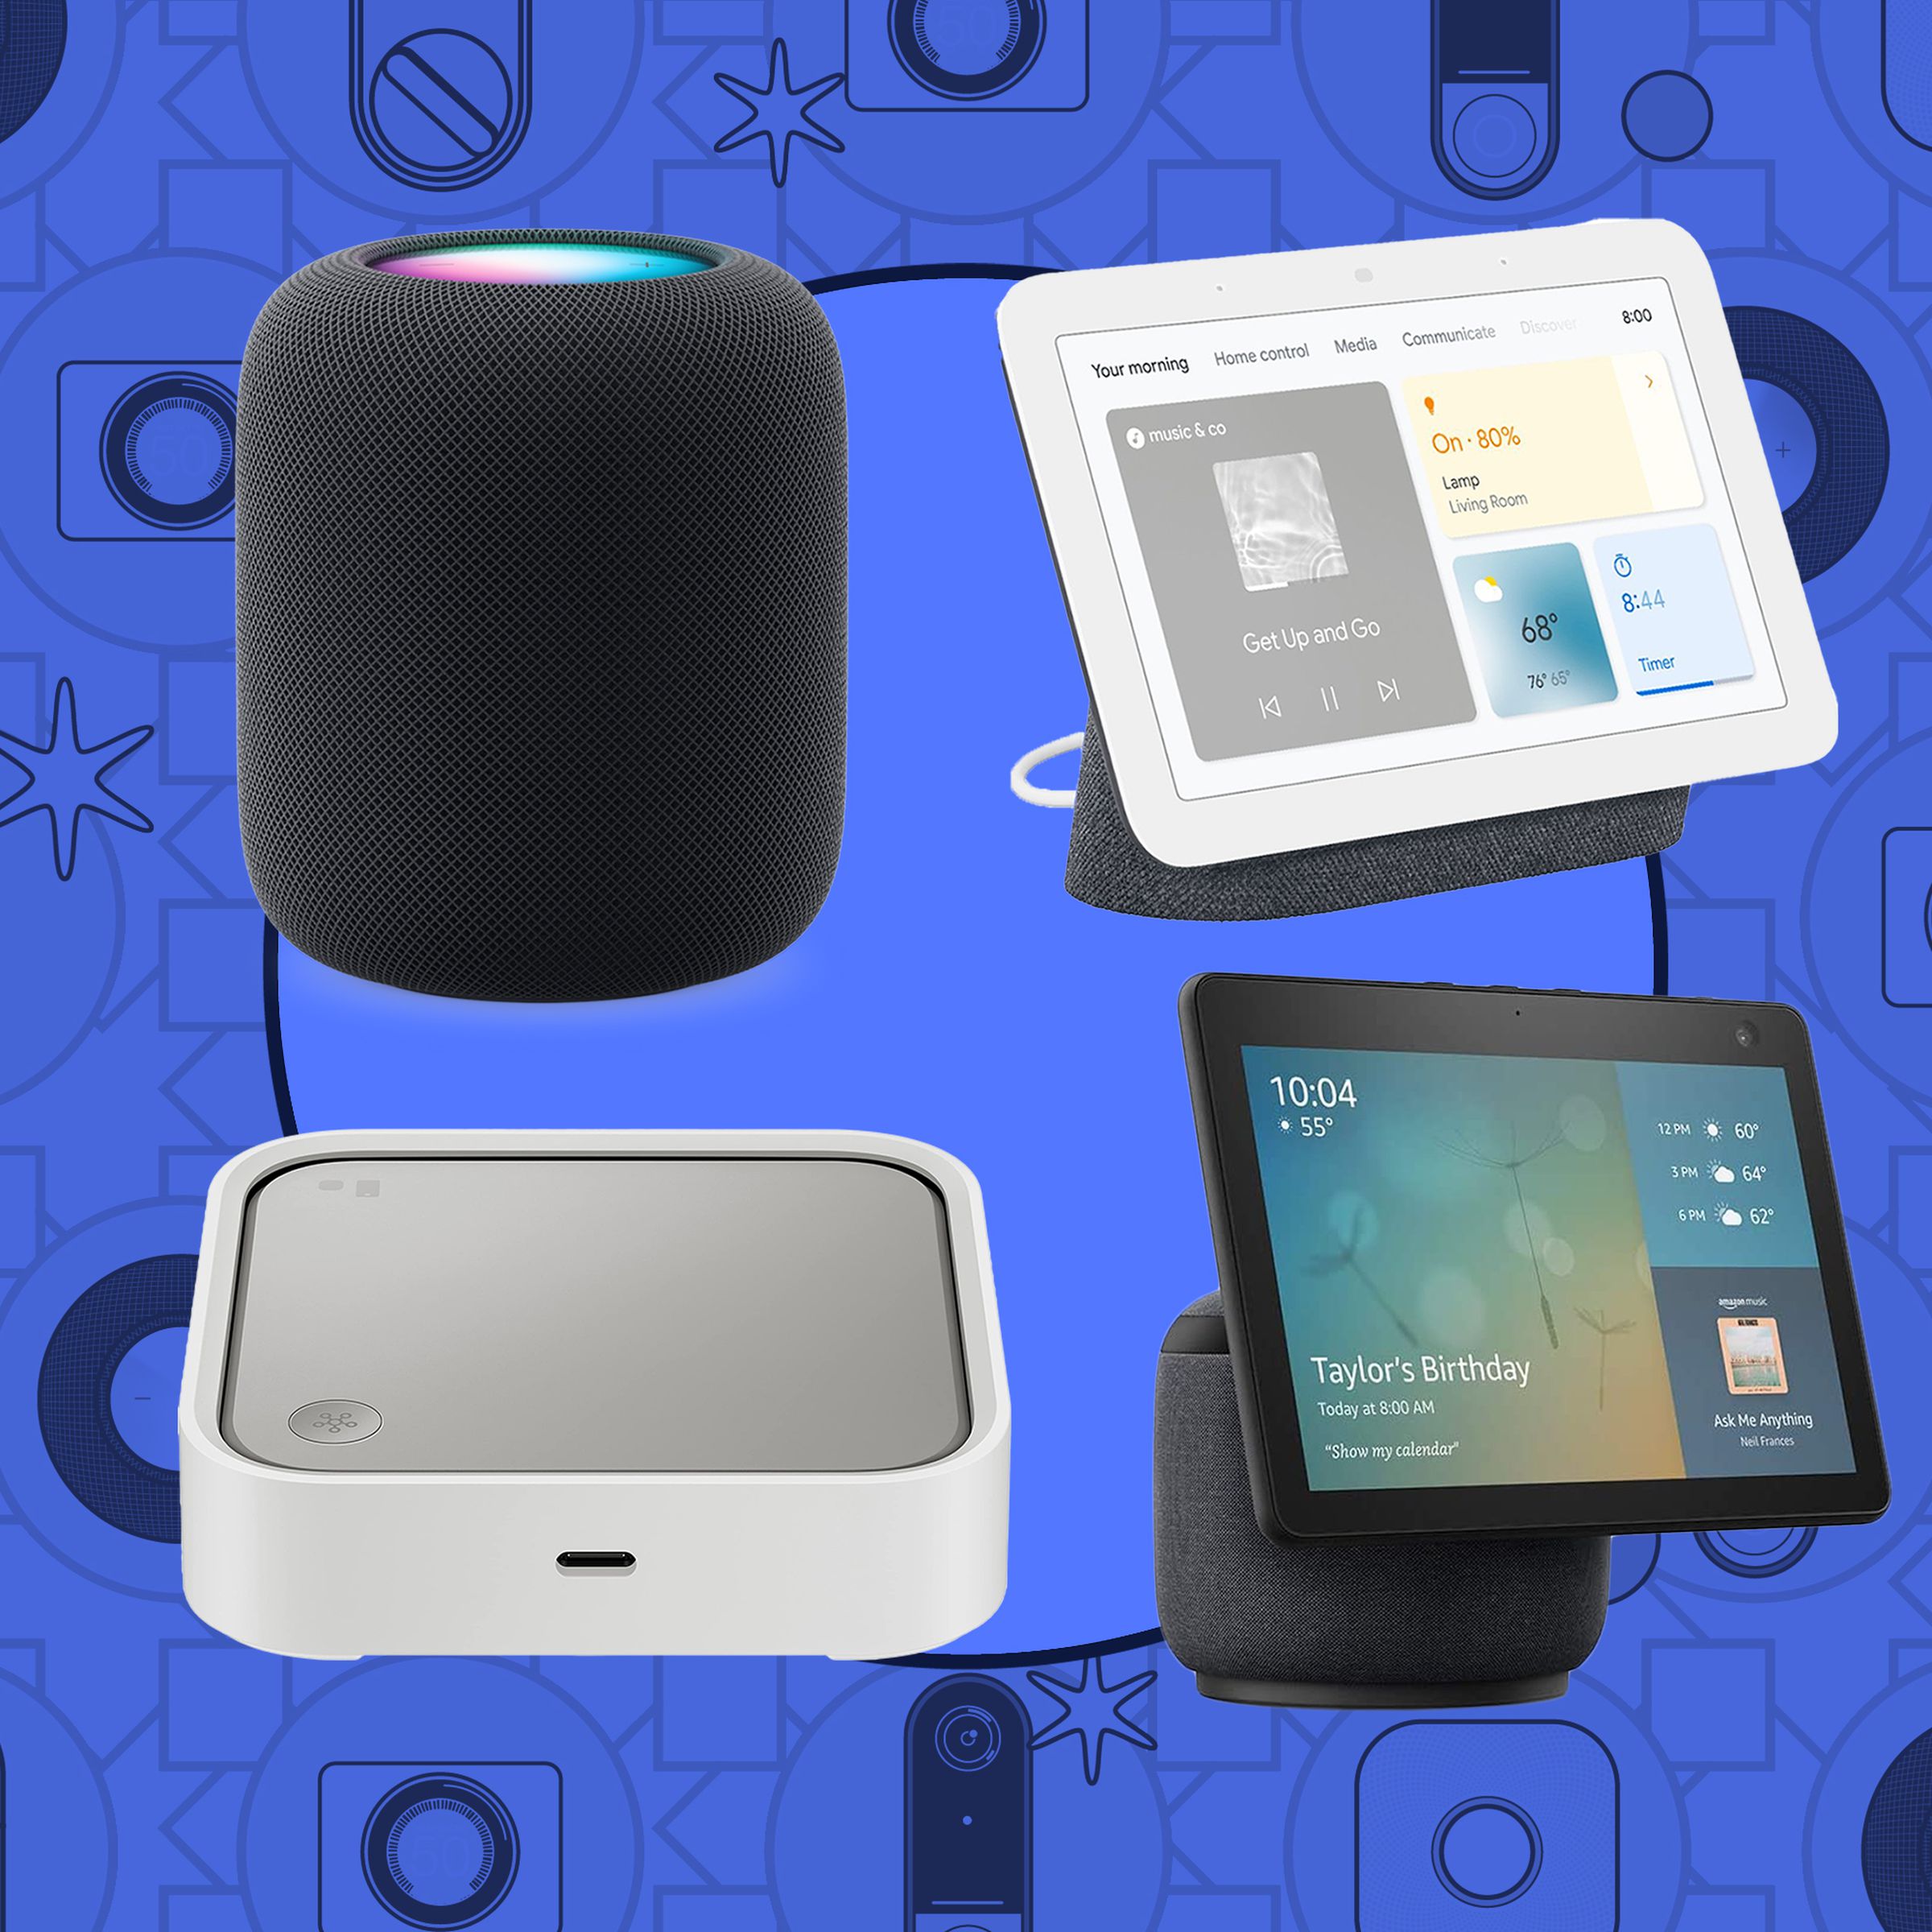 Guide to Set Up Your Voice Assistant Smart Speakers